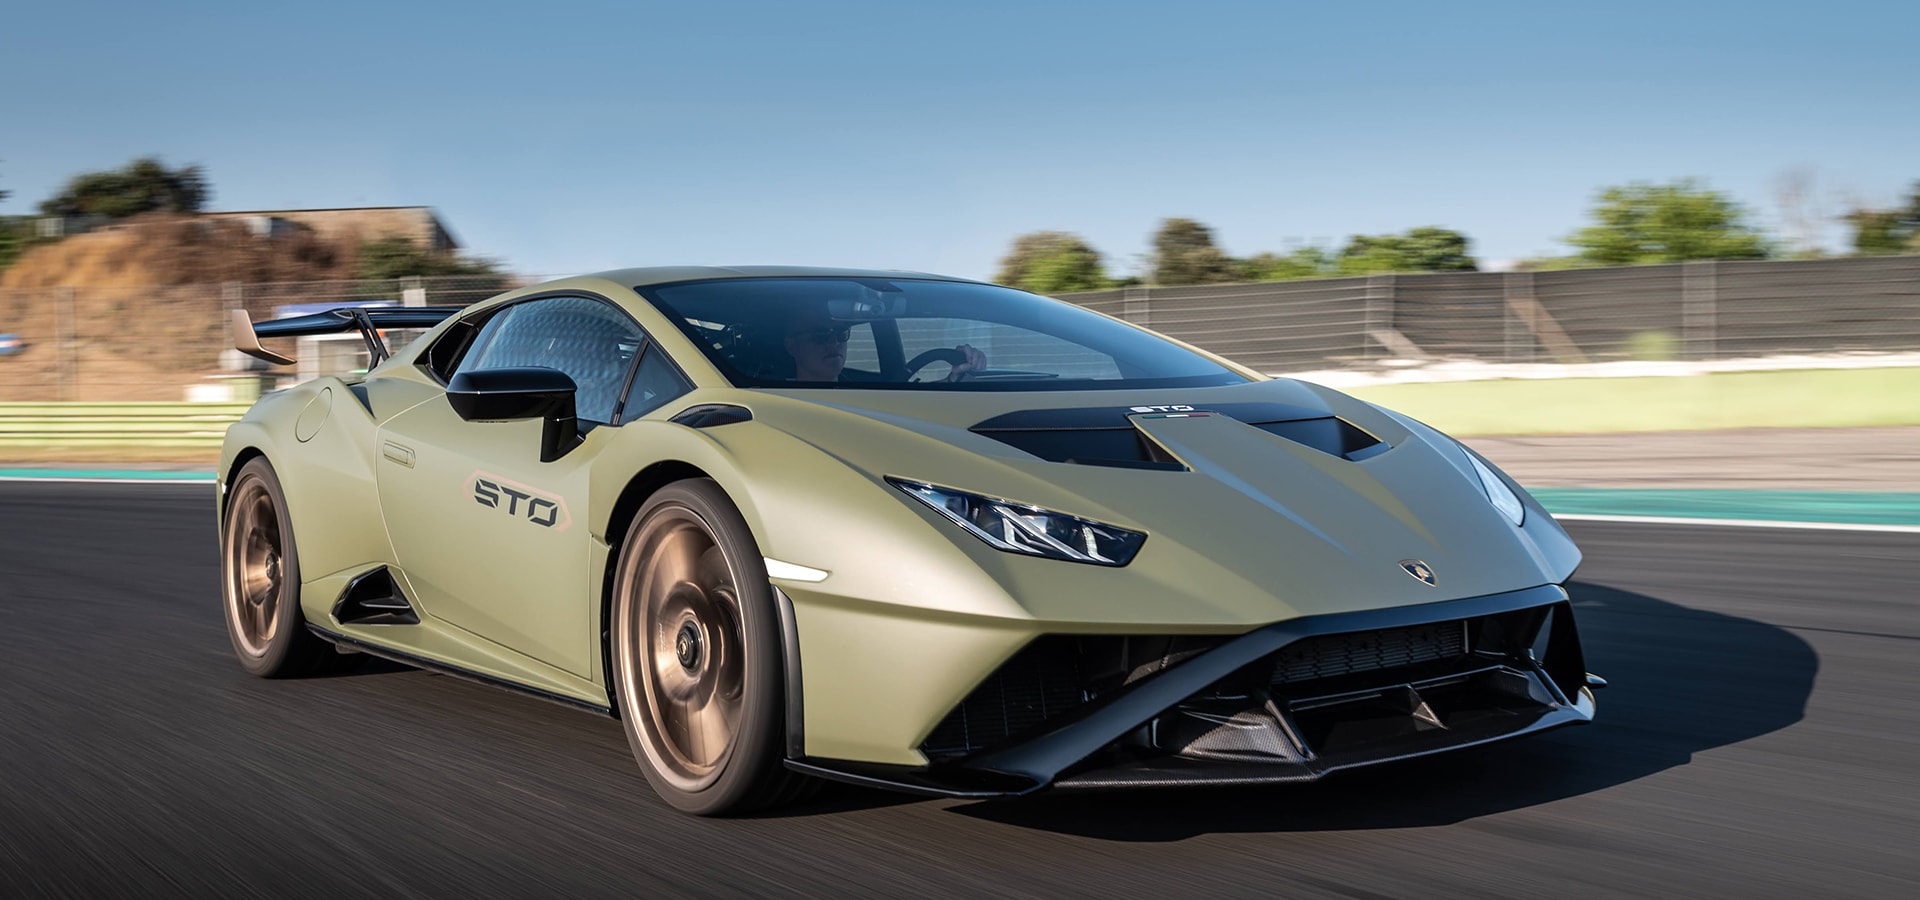 Lamborghini Huracan STO: Now in pictures - CarWale